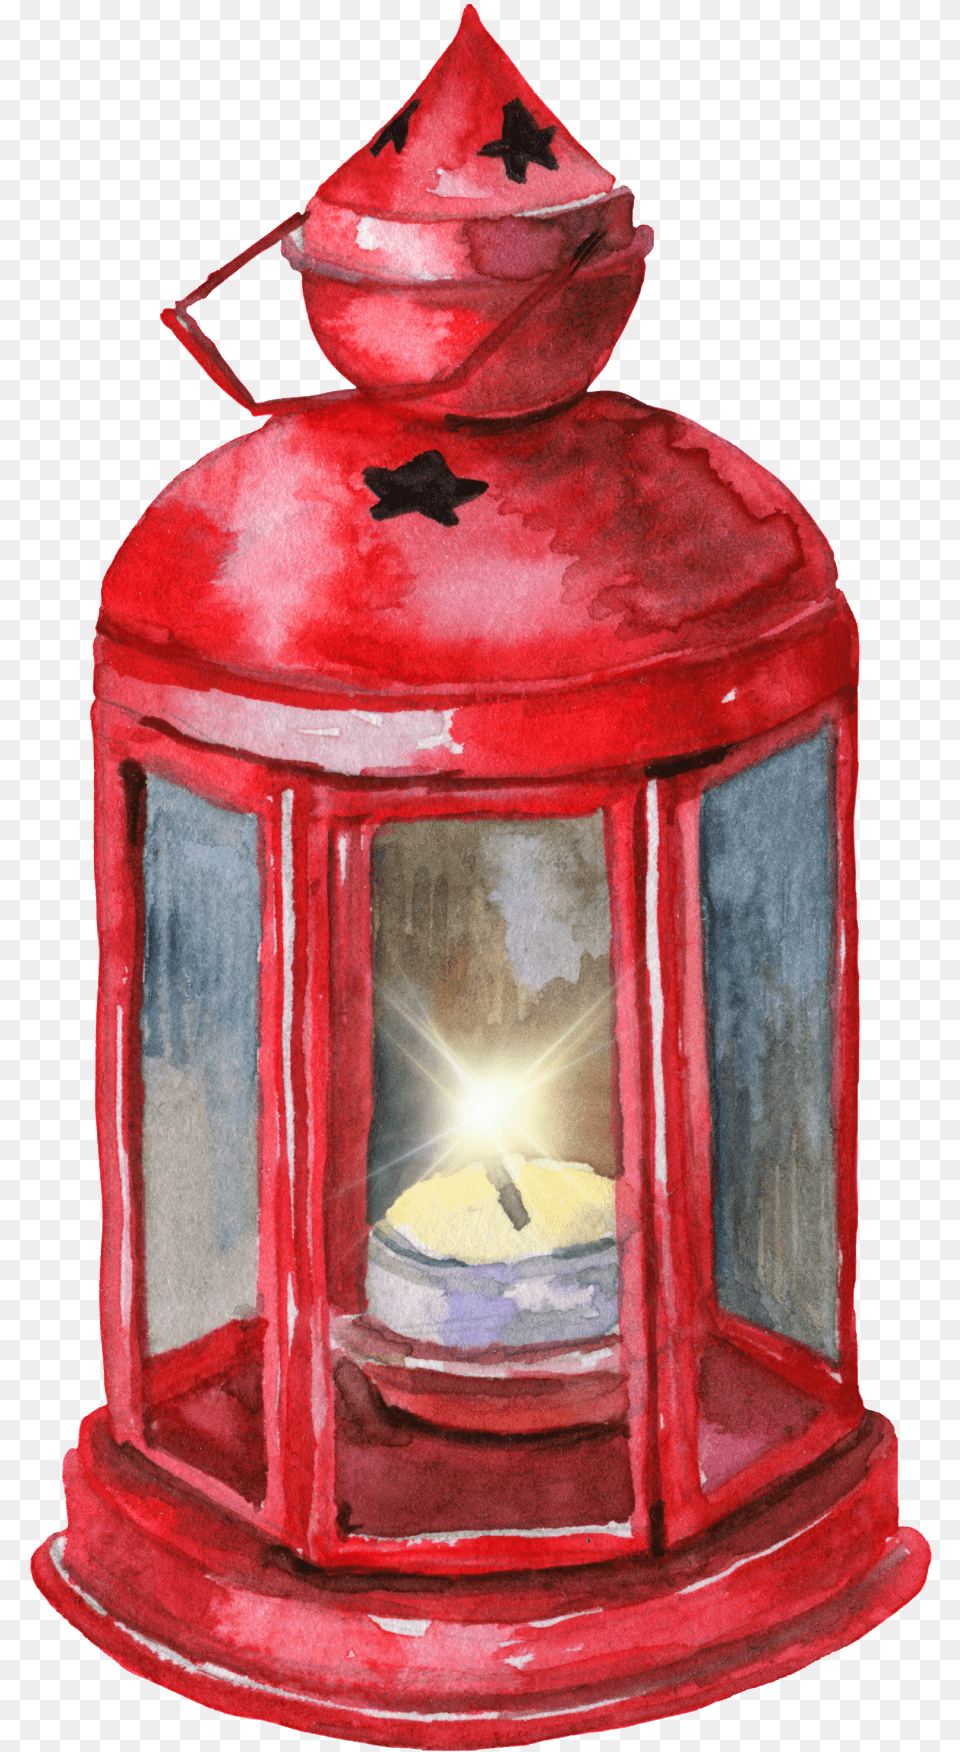 Hand Painted Cartoon Red Oil Lamp Transparent Portable Network Graphics, Lantern, Fire Hydrant, Hydrant Png